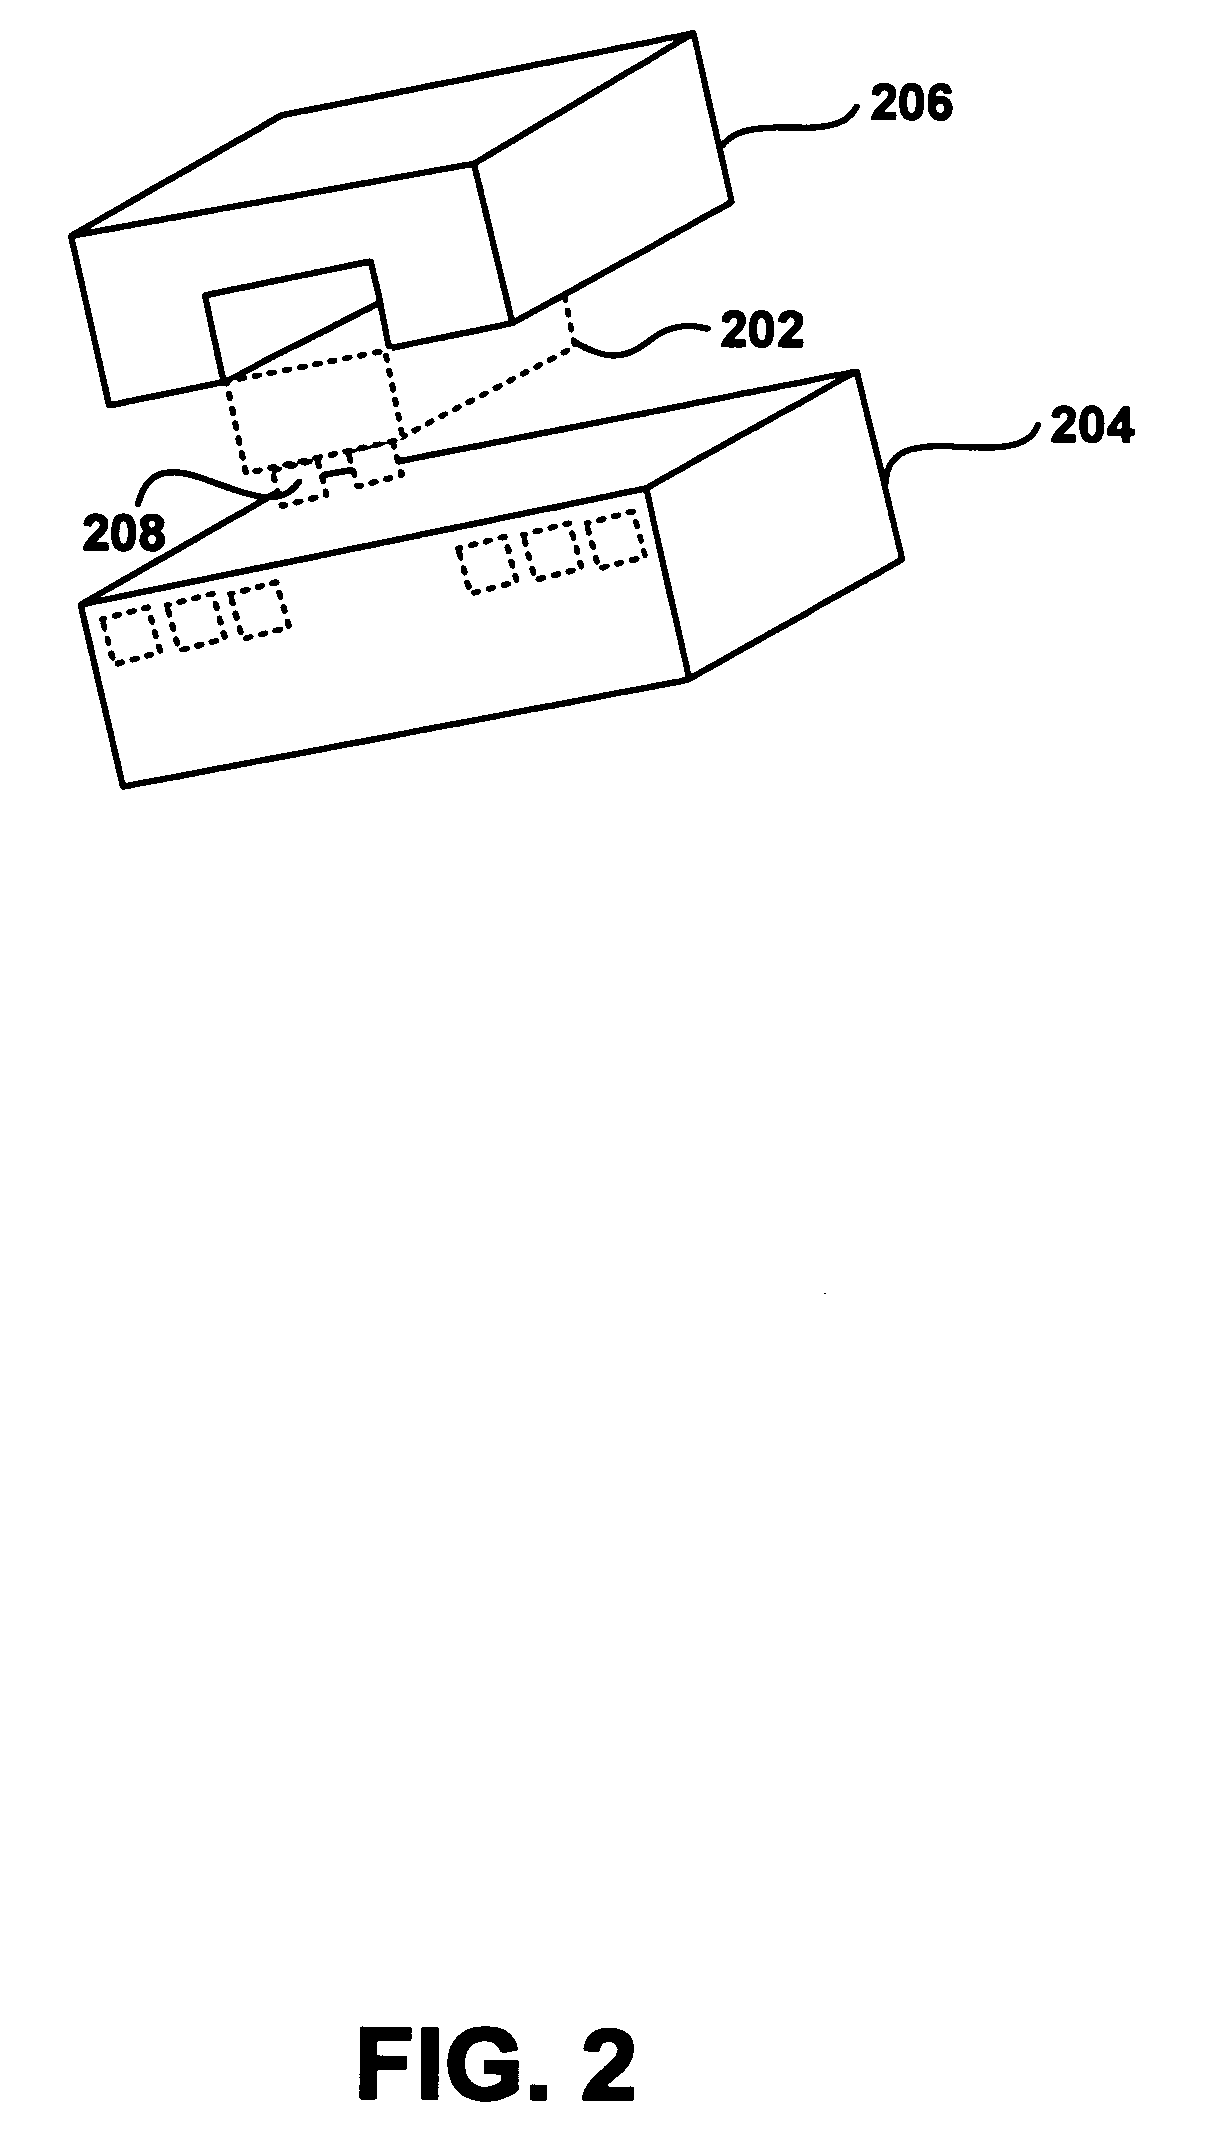 Components and assembly procedure for thermal assisted recording